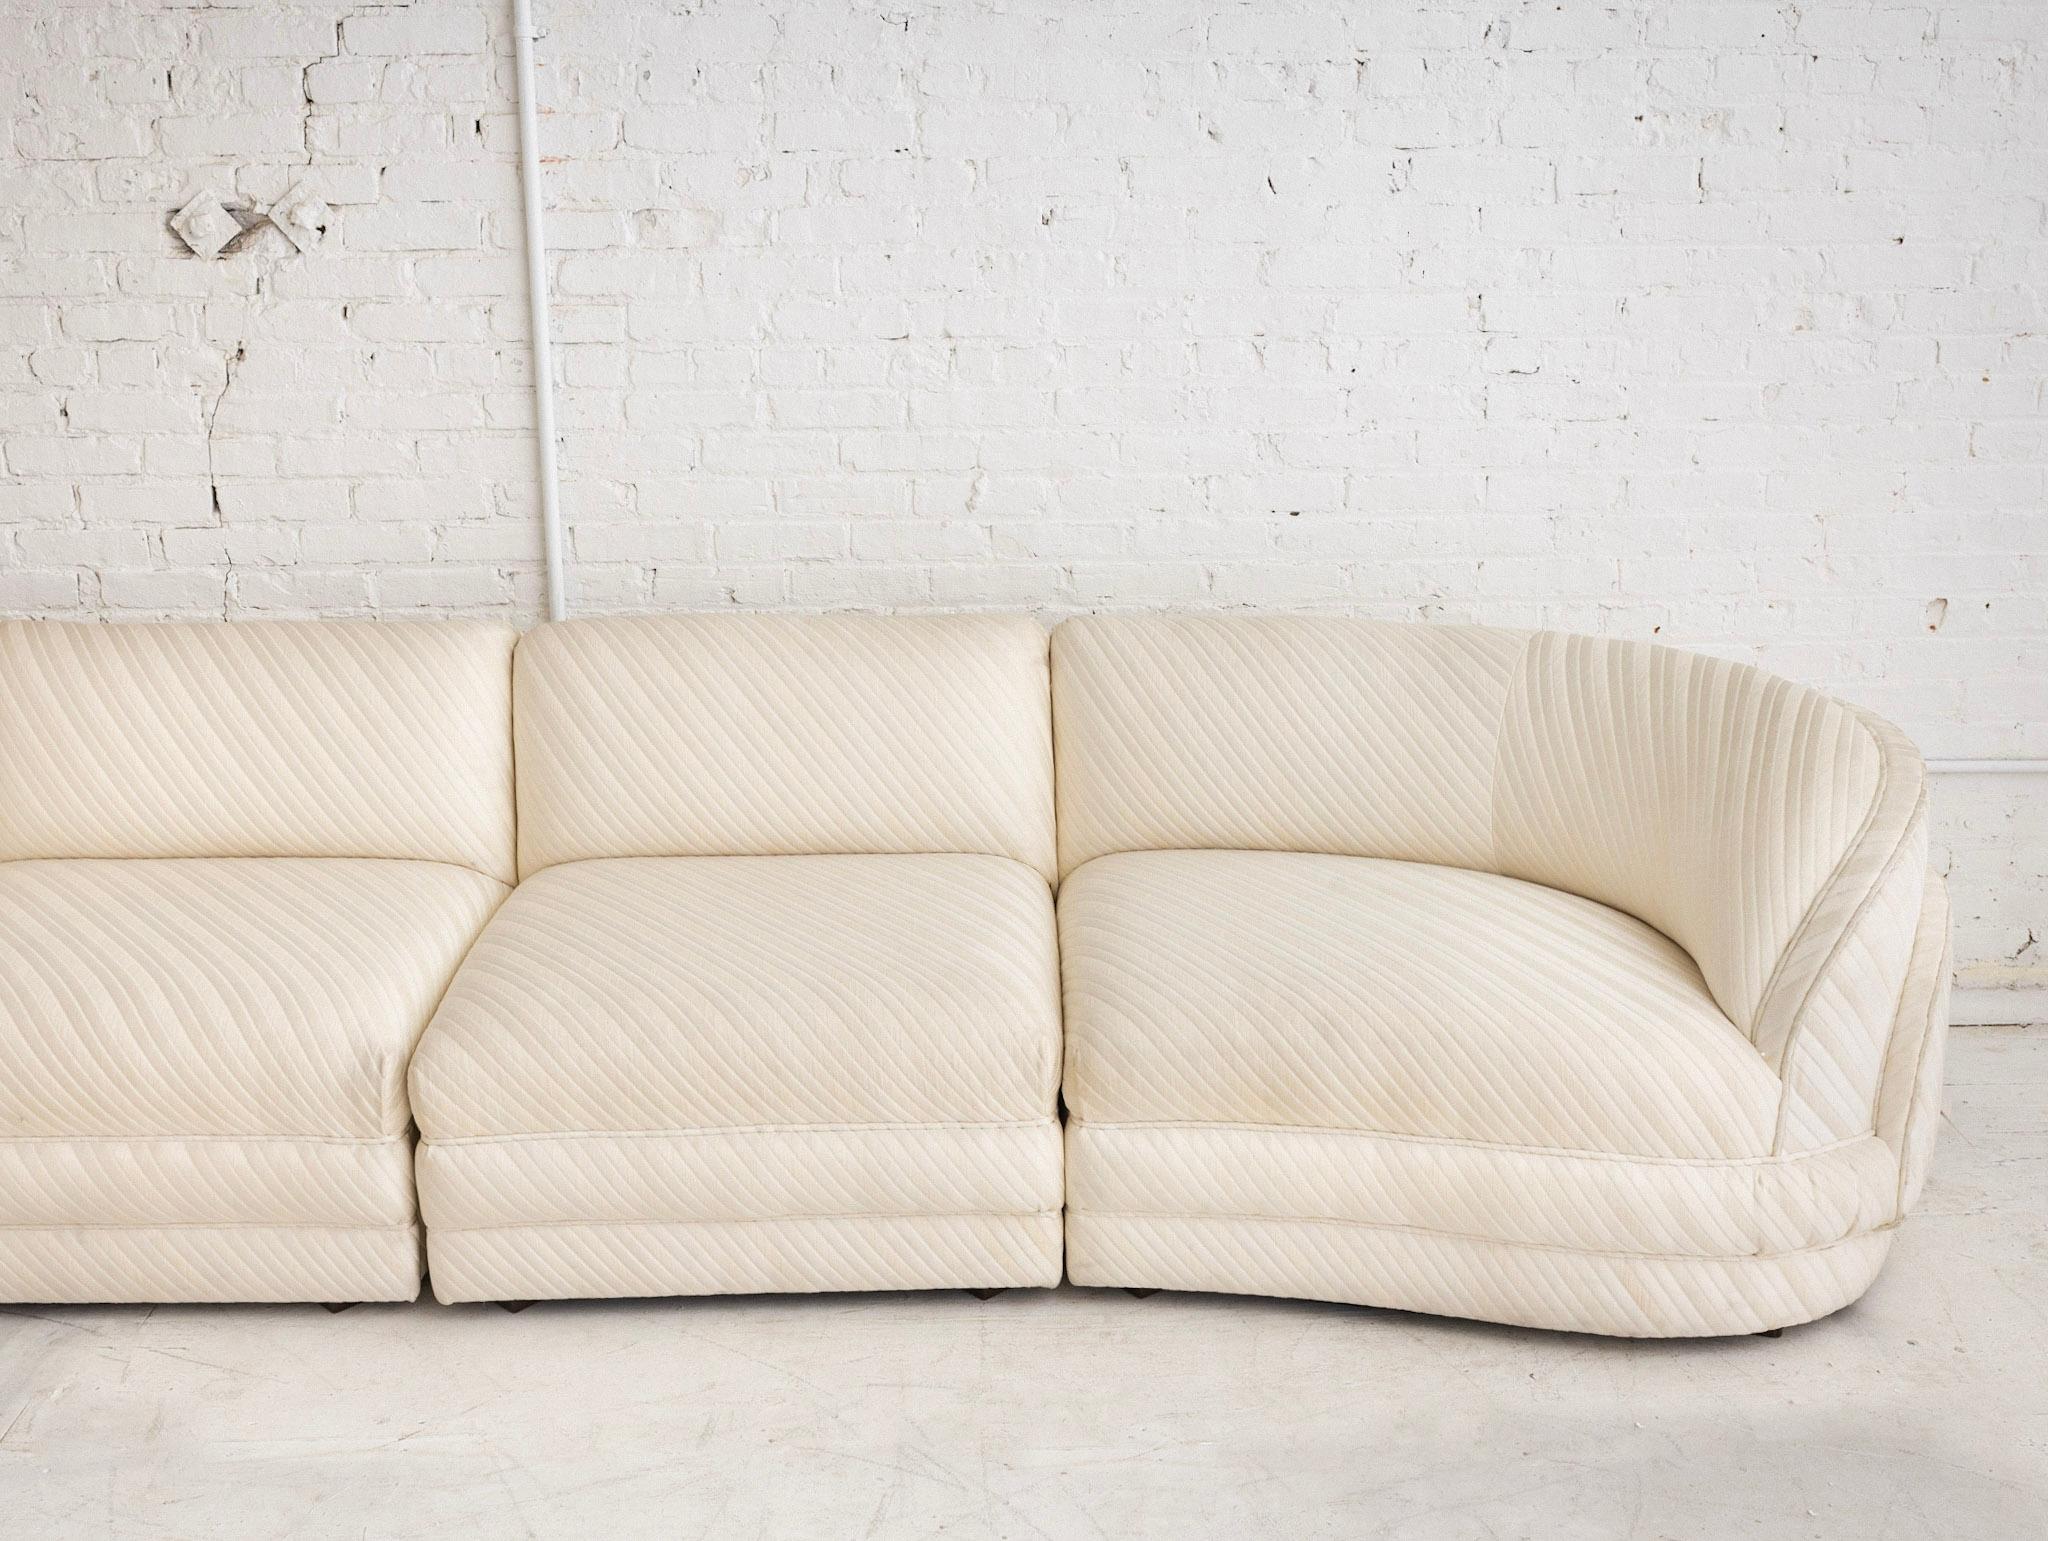 Late 20th Century Cloud Form Post Modern 5 Piece Sectional in Cream Jacquard Stripe Upholstery